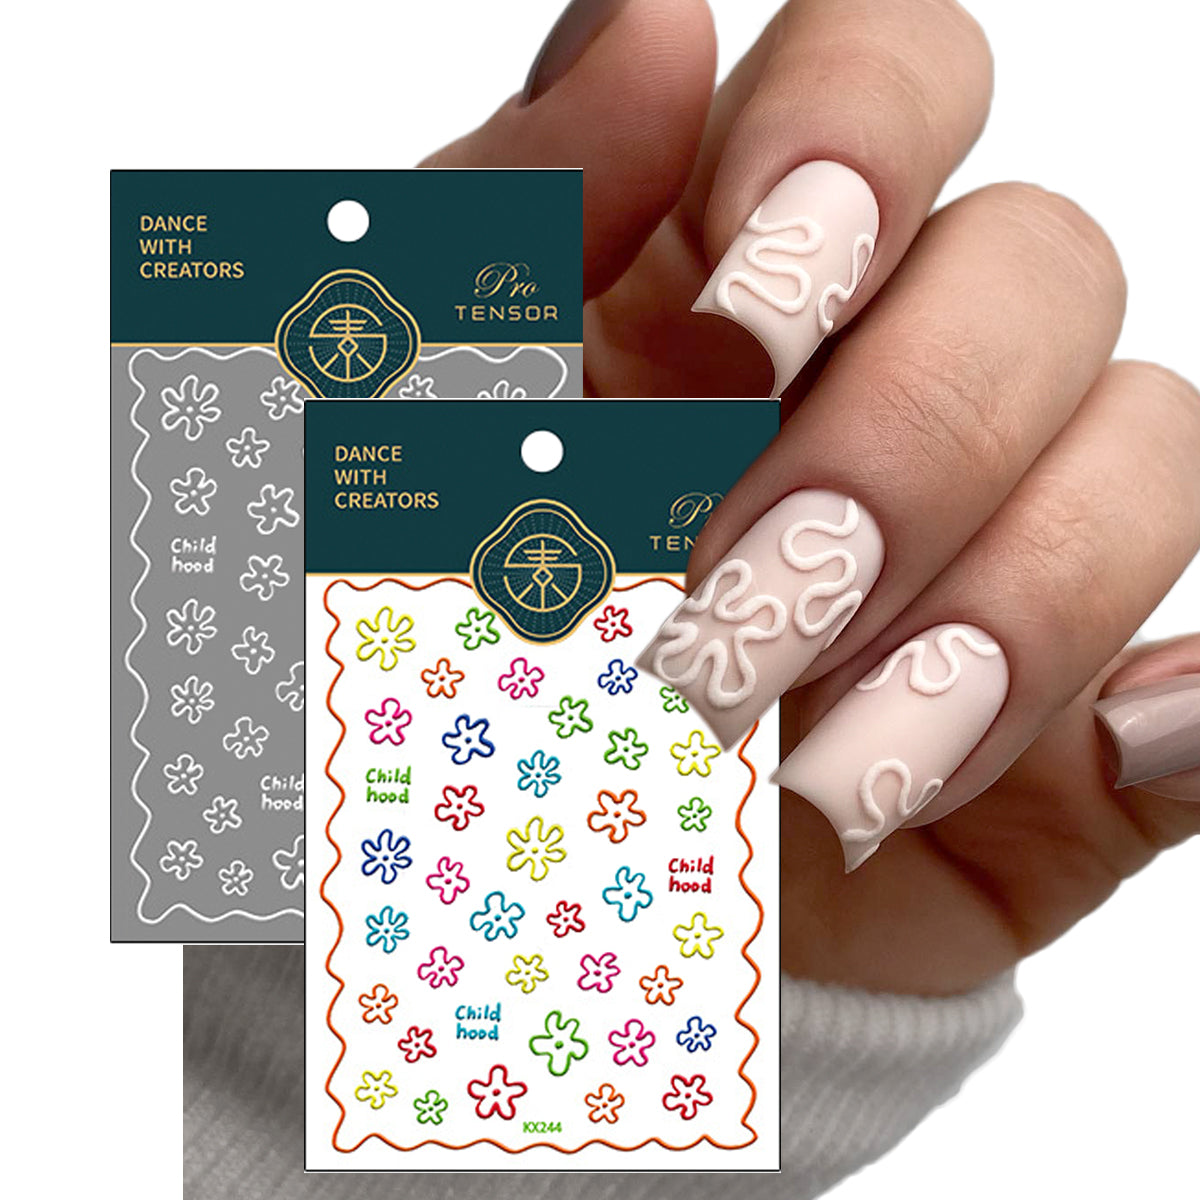 NailMAD Doodle Floral Outline Nail Art Stickers Adhesive Embossed Matte Line Flower Sticker Decals KX244